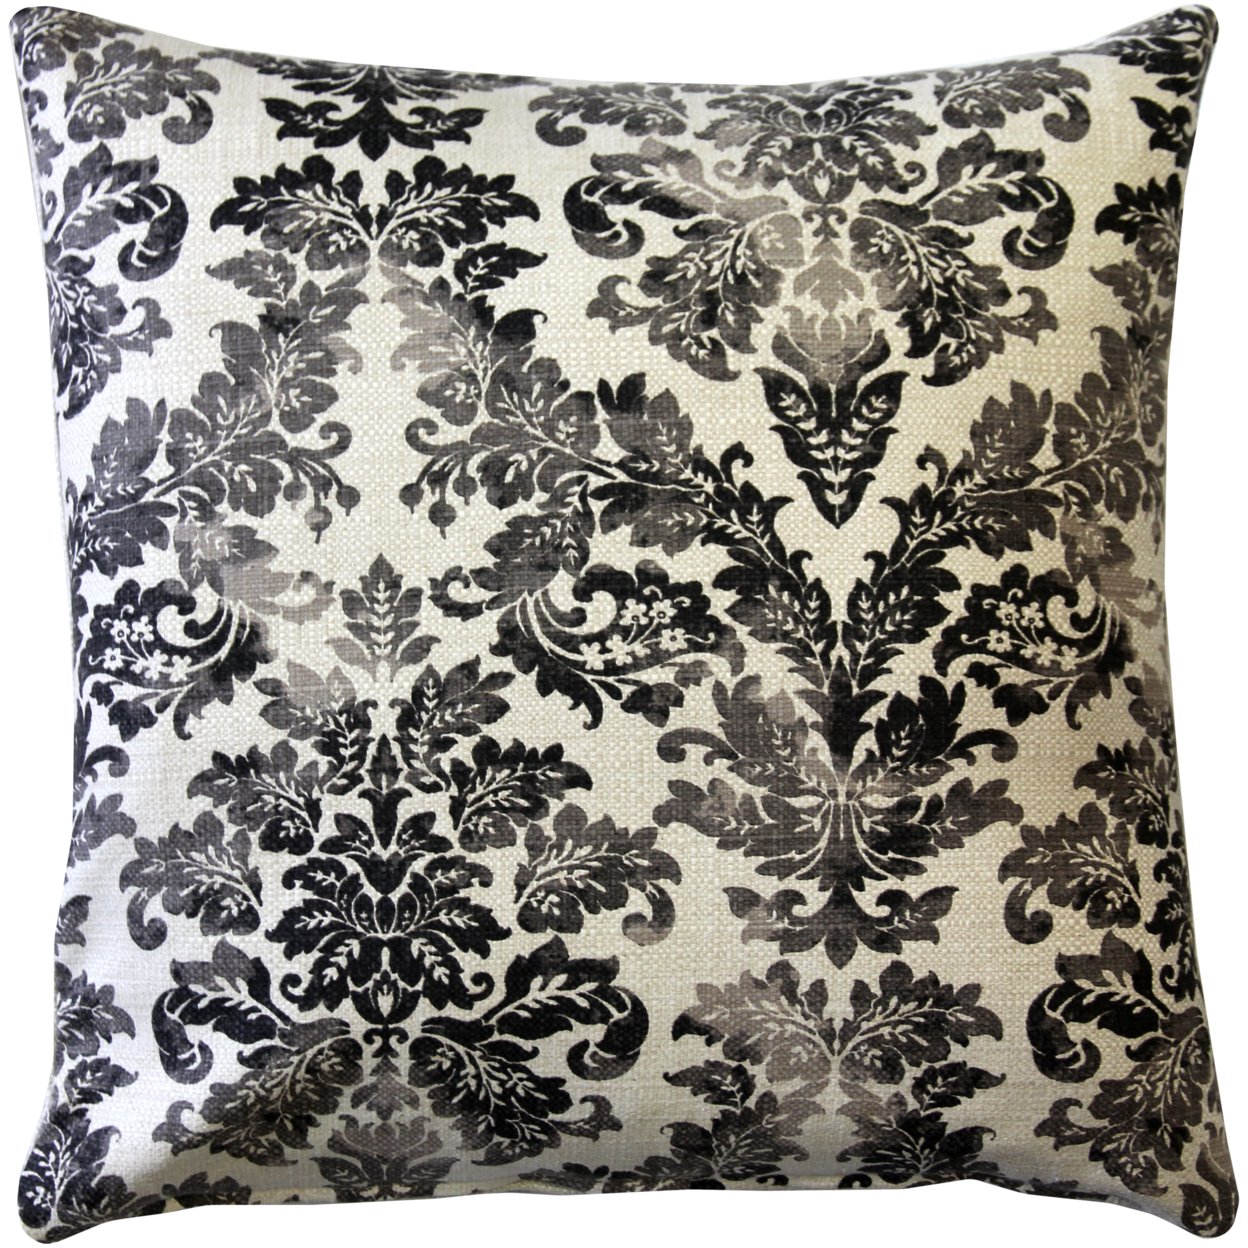 Calliope Gray Damask Pattern Throw Pillow 20x20 Inches Square, Complete Pillow with Polyfill Pillow Insert